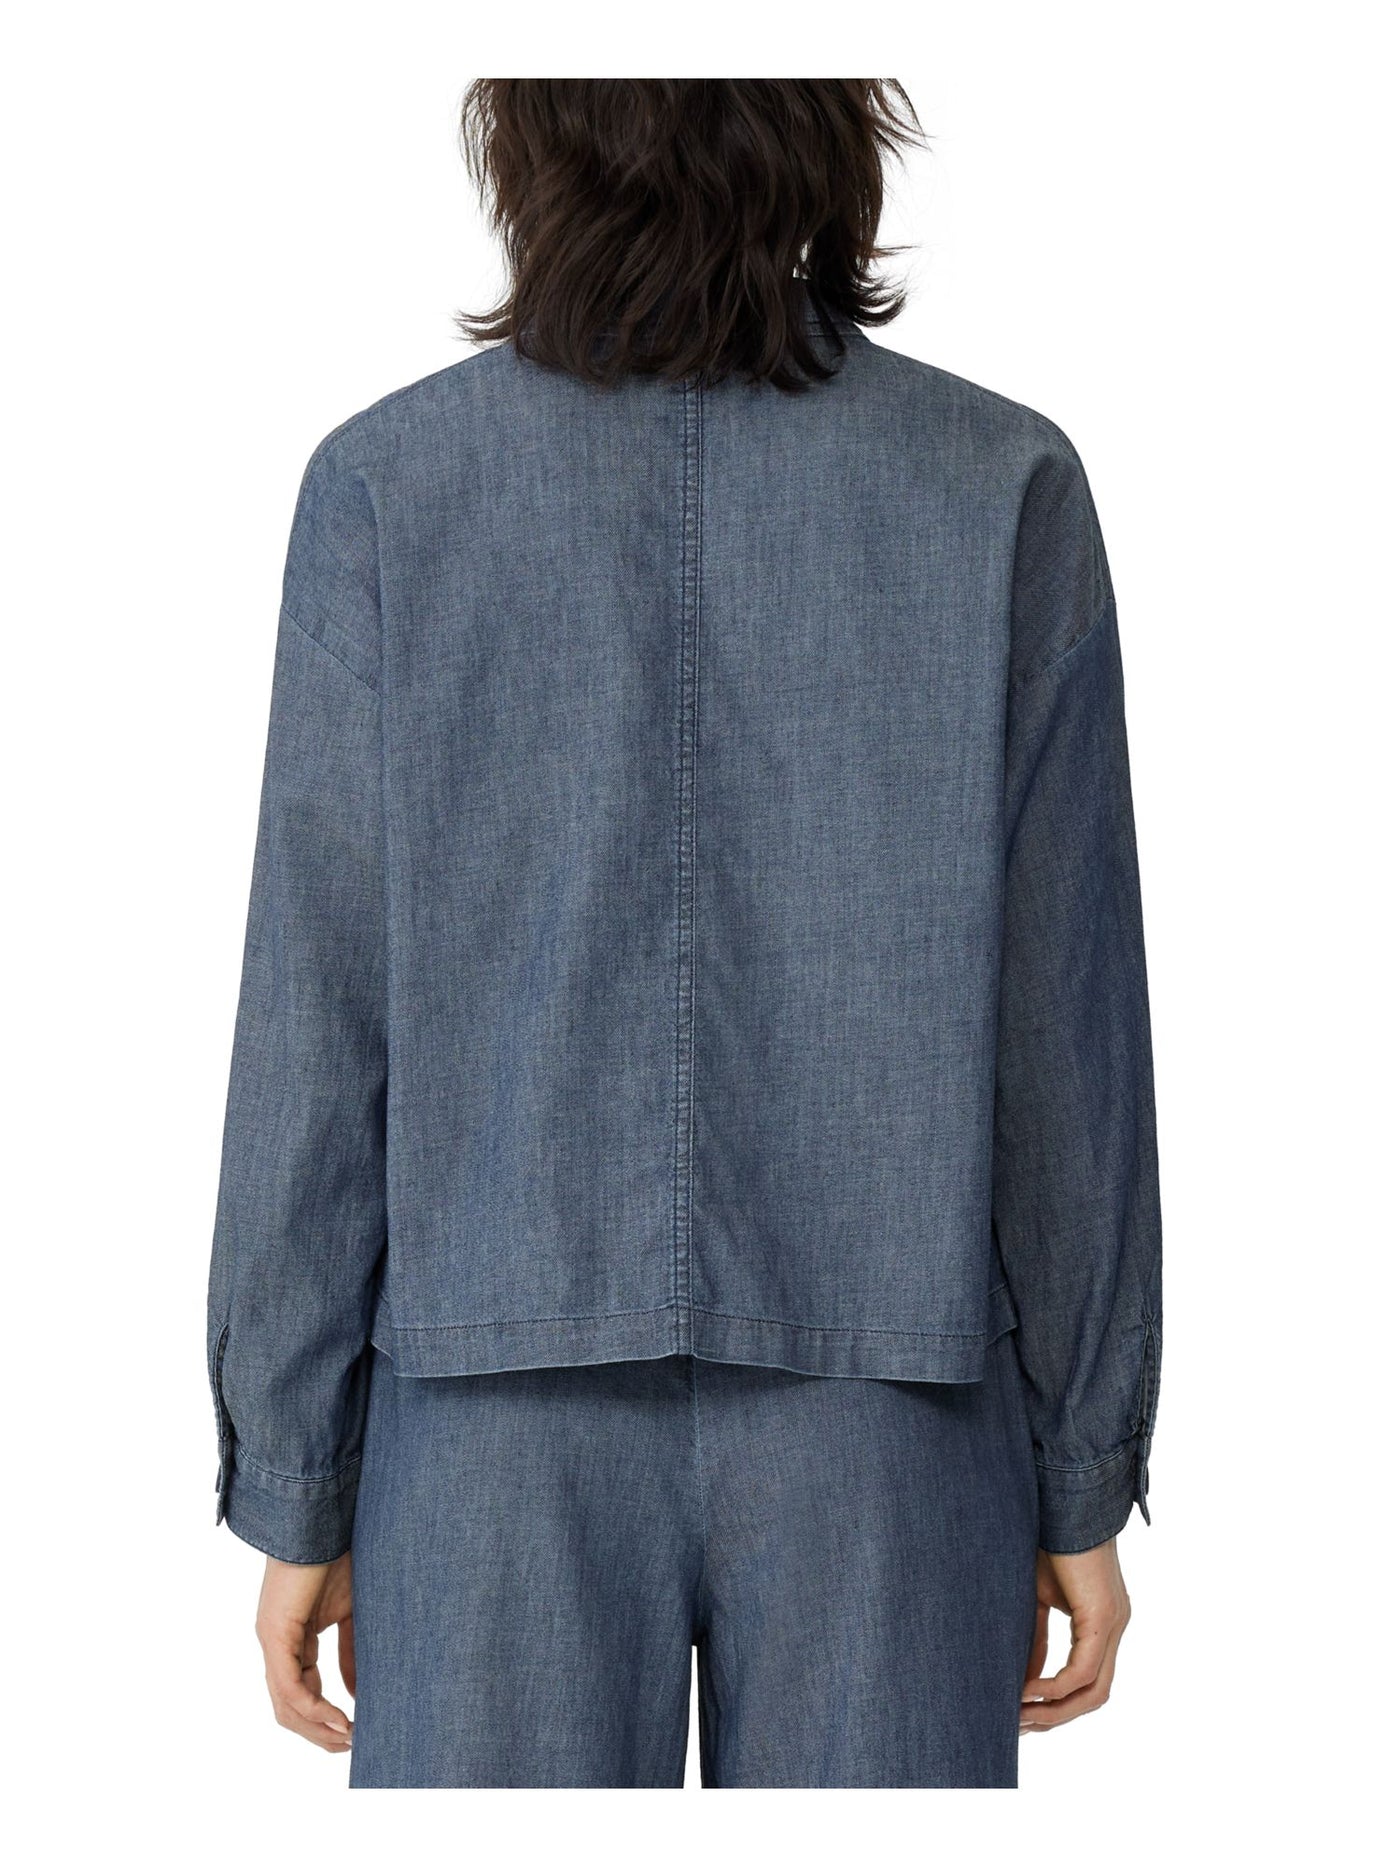 EILEEN FISHER Womens Blue Pocketed Collard Heather Button Down Jacket Petites PS \ PP